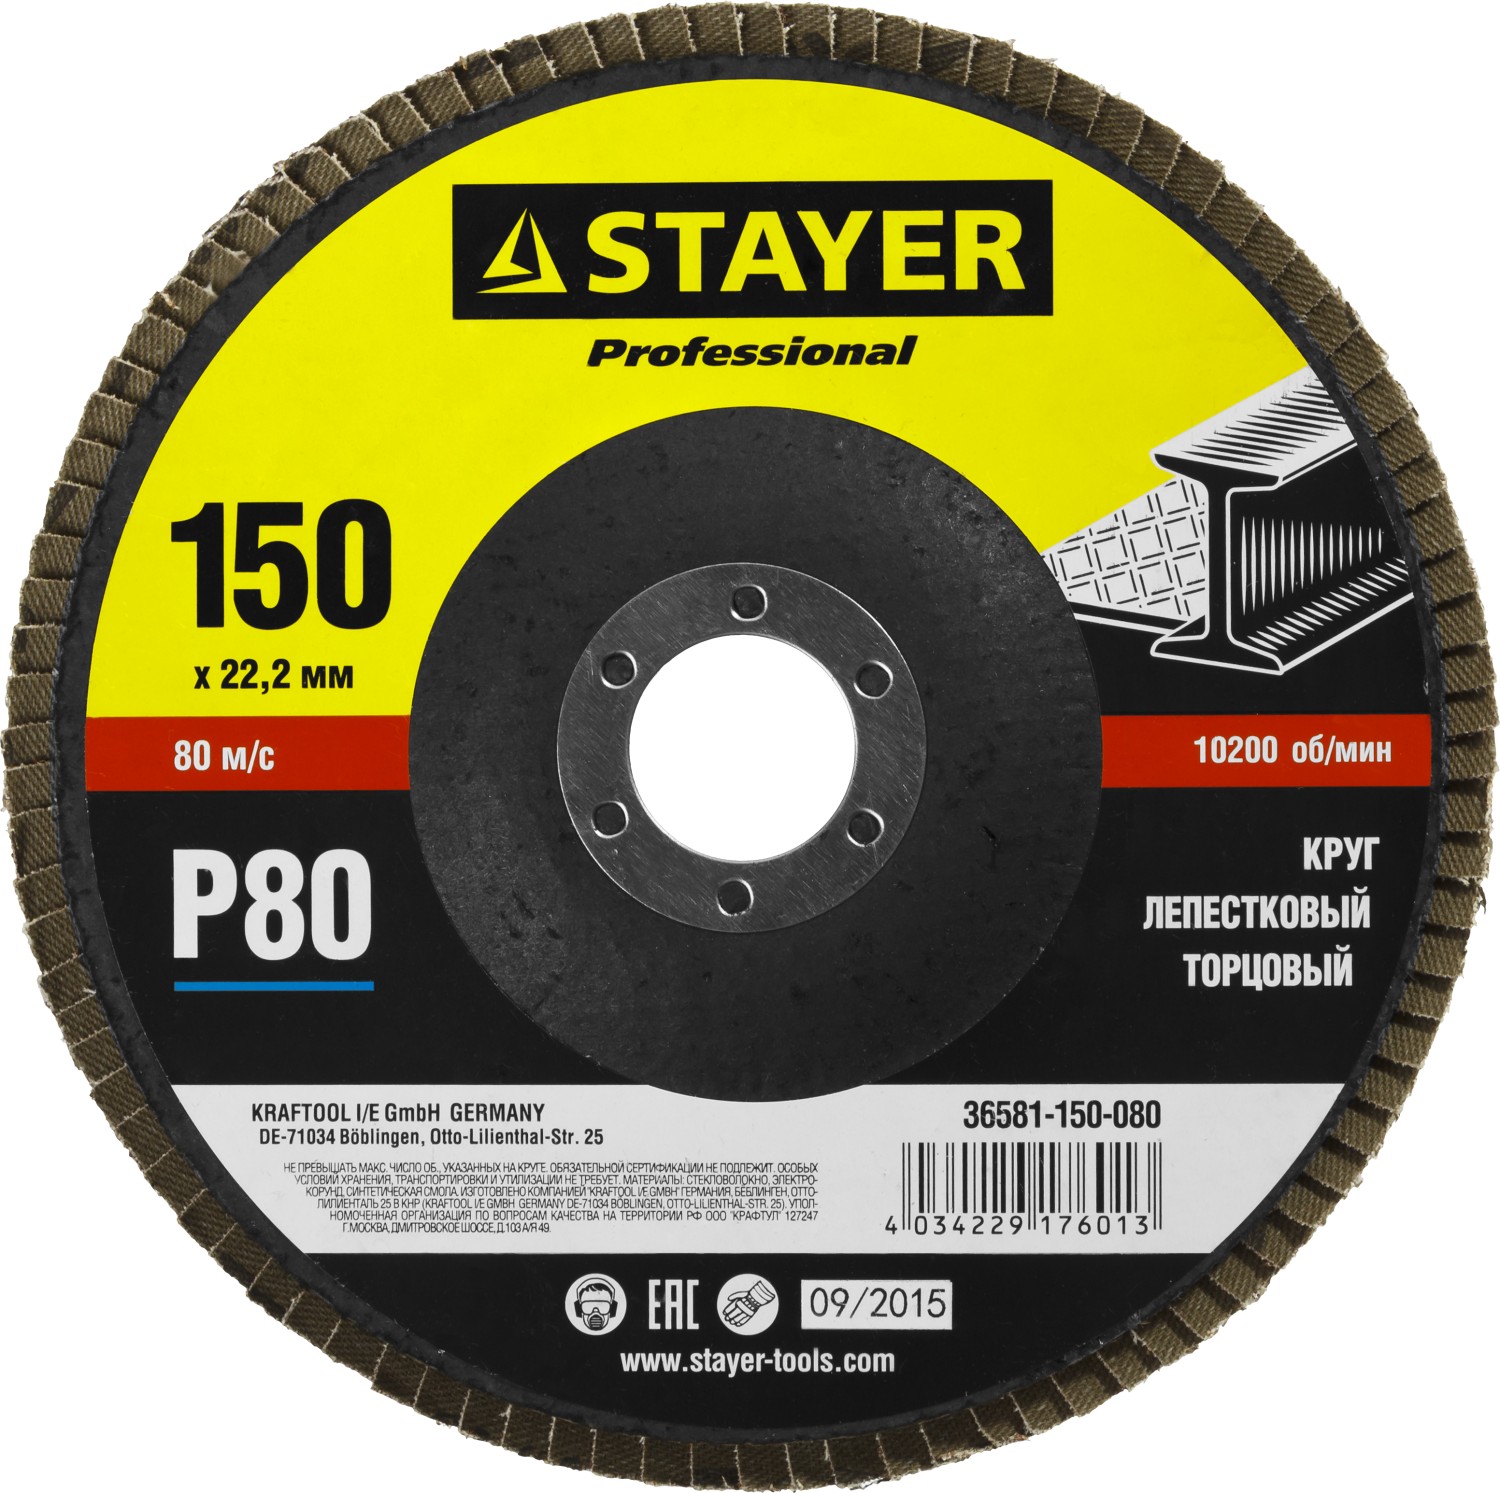 STAYER 150 , P80, ,   , Professional (36581-150-080)